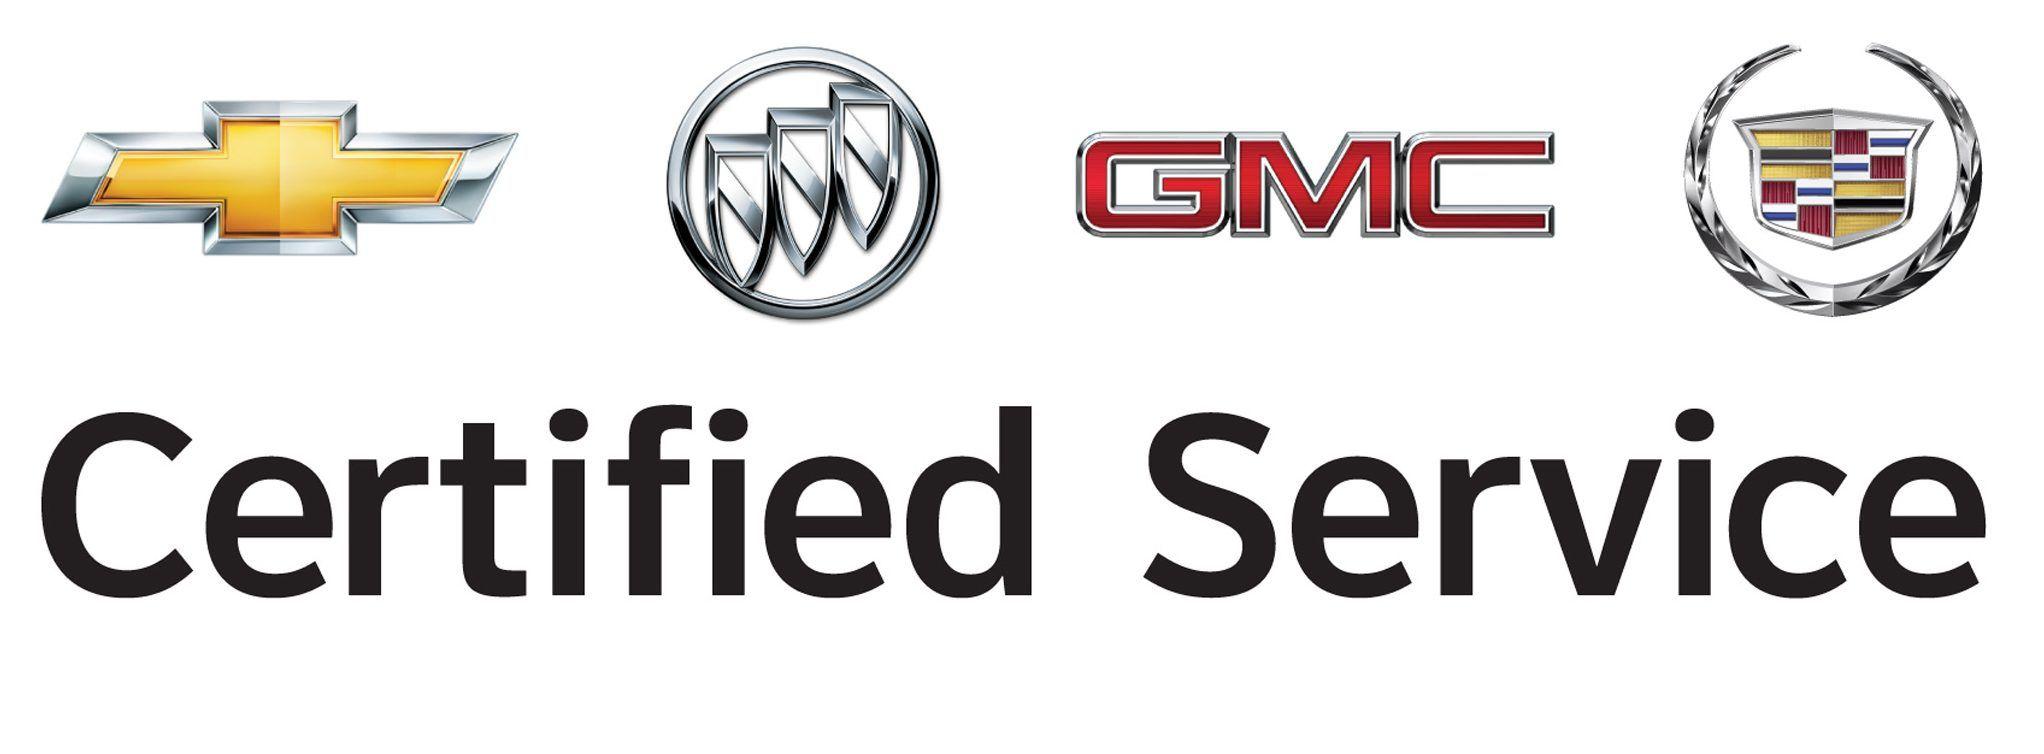 Certified Cadillac Logo - Certified Service Launches at Chevrolet, Buick, GMC and Cadillac ...